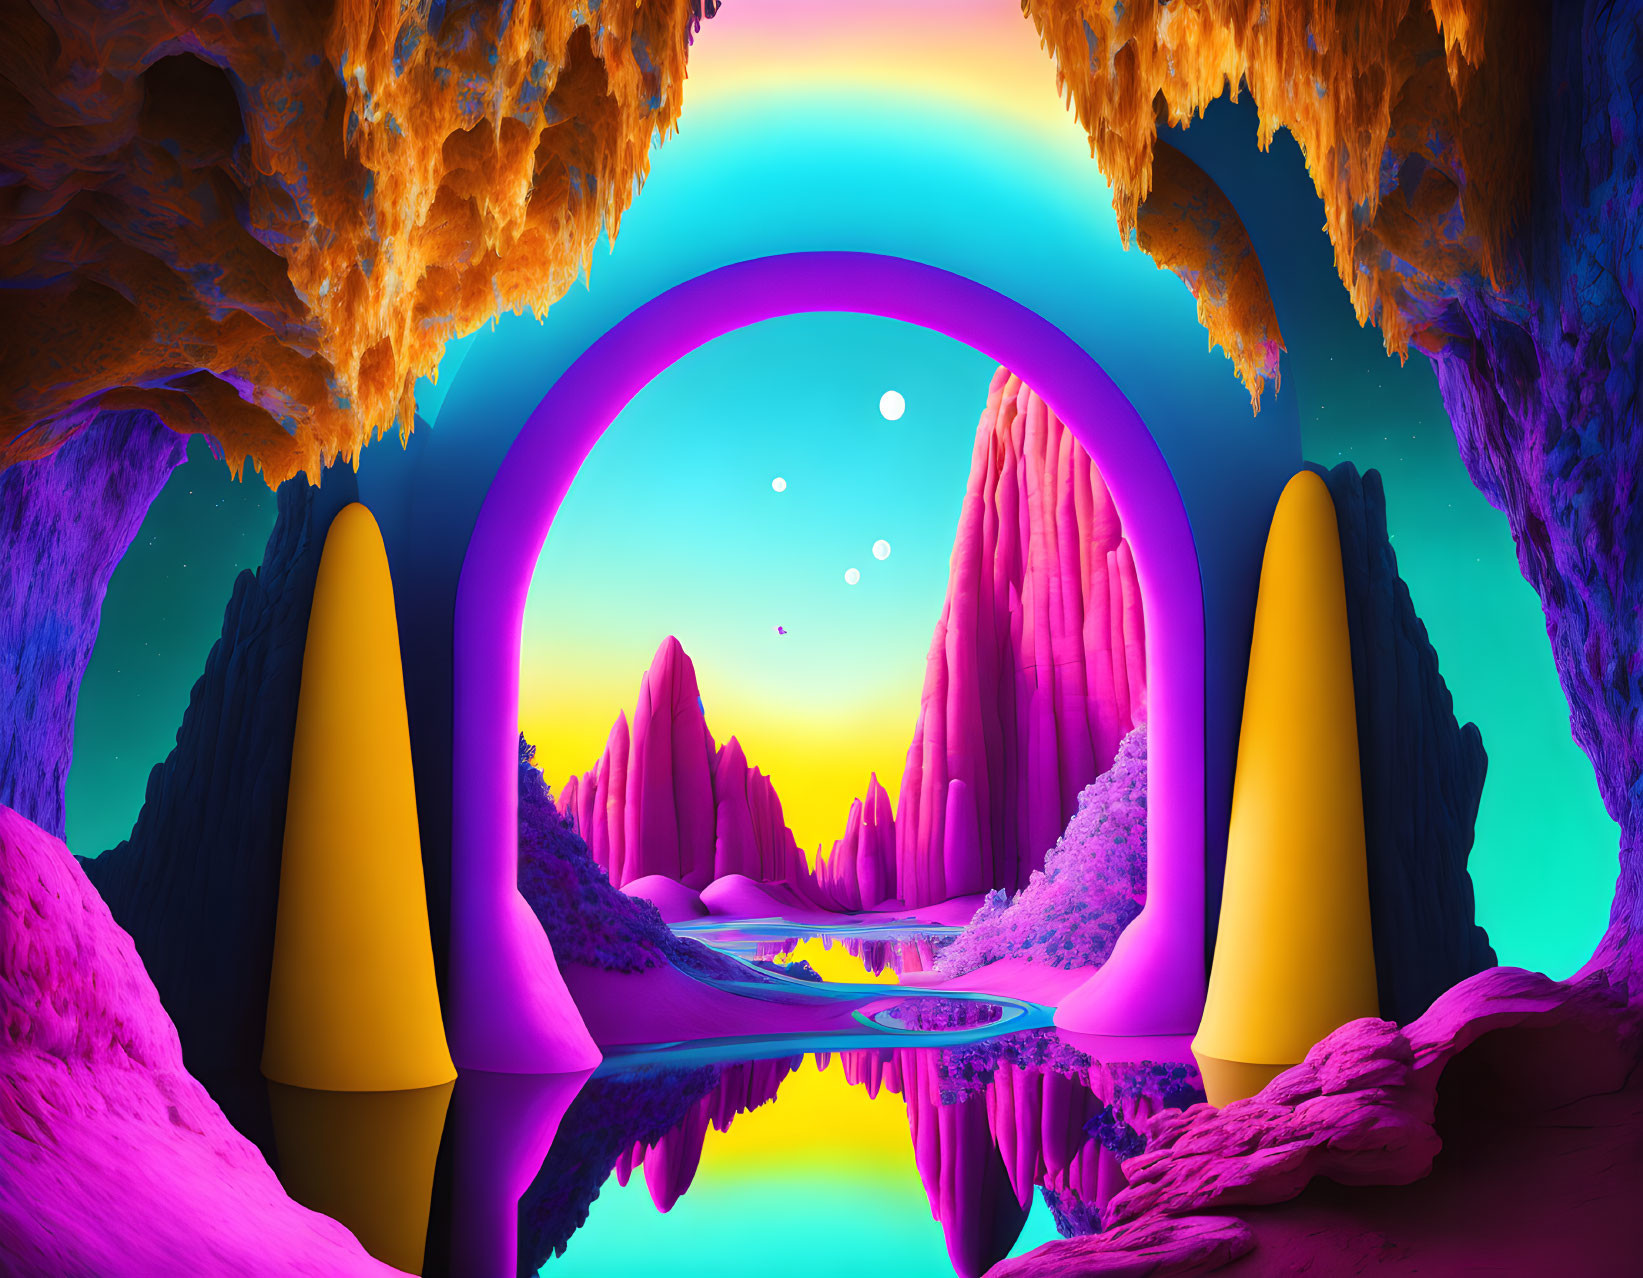 Vibrant digital art landscape with neon purple and blue hues